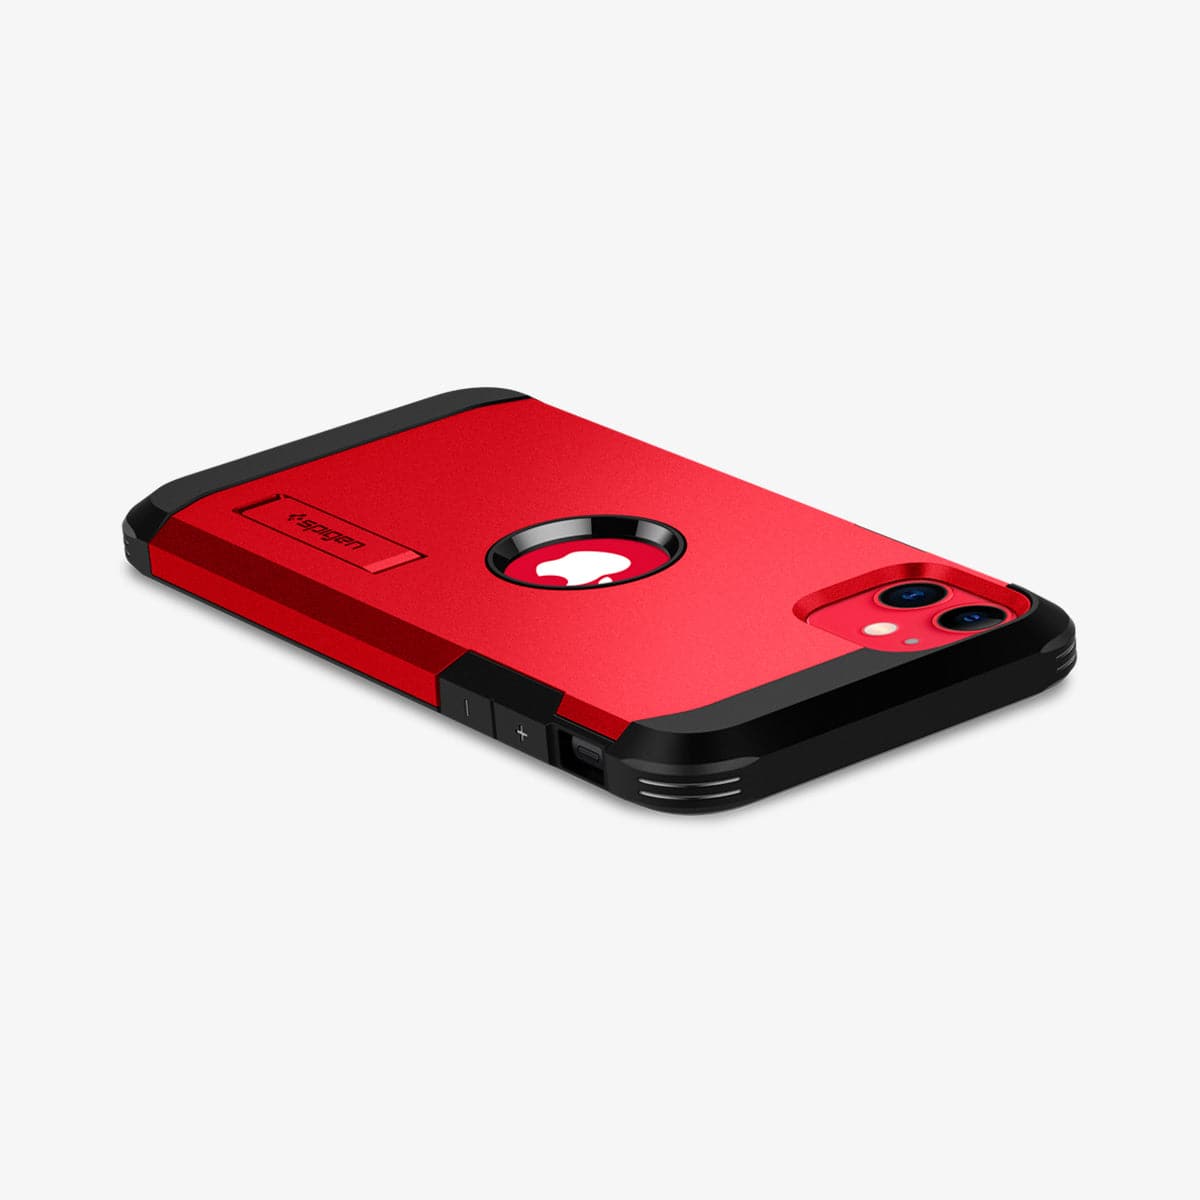 ACS00408 - iPhone 11 Case Tough Armor XP in red showing the back, side and top